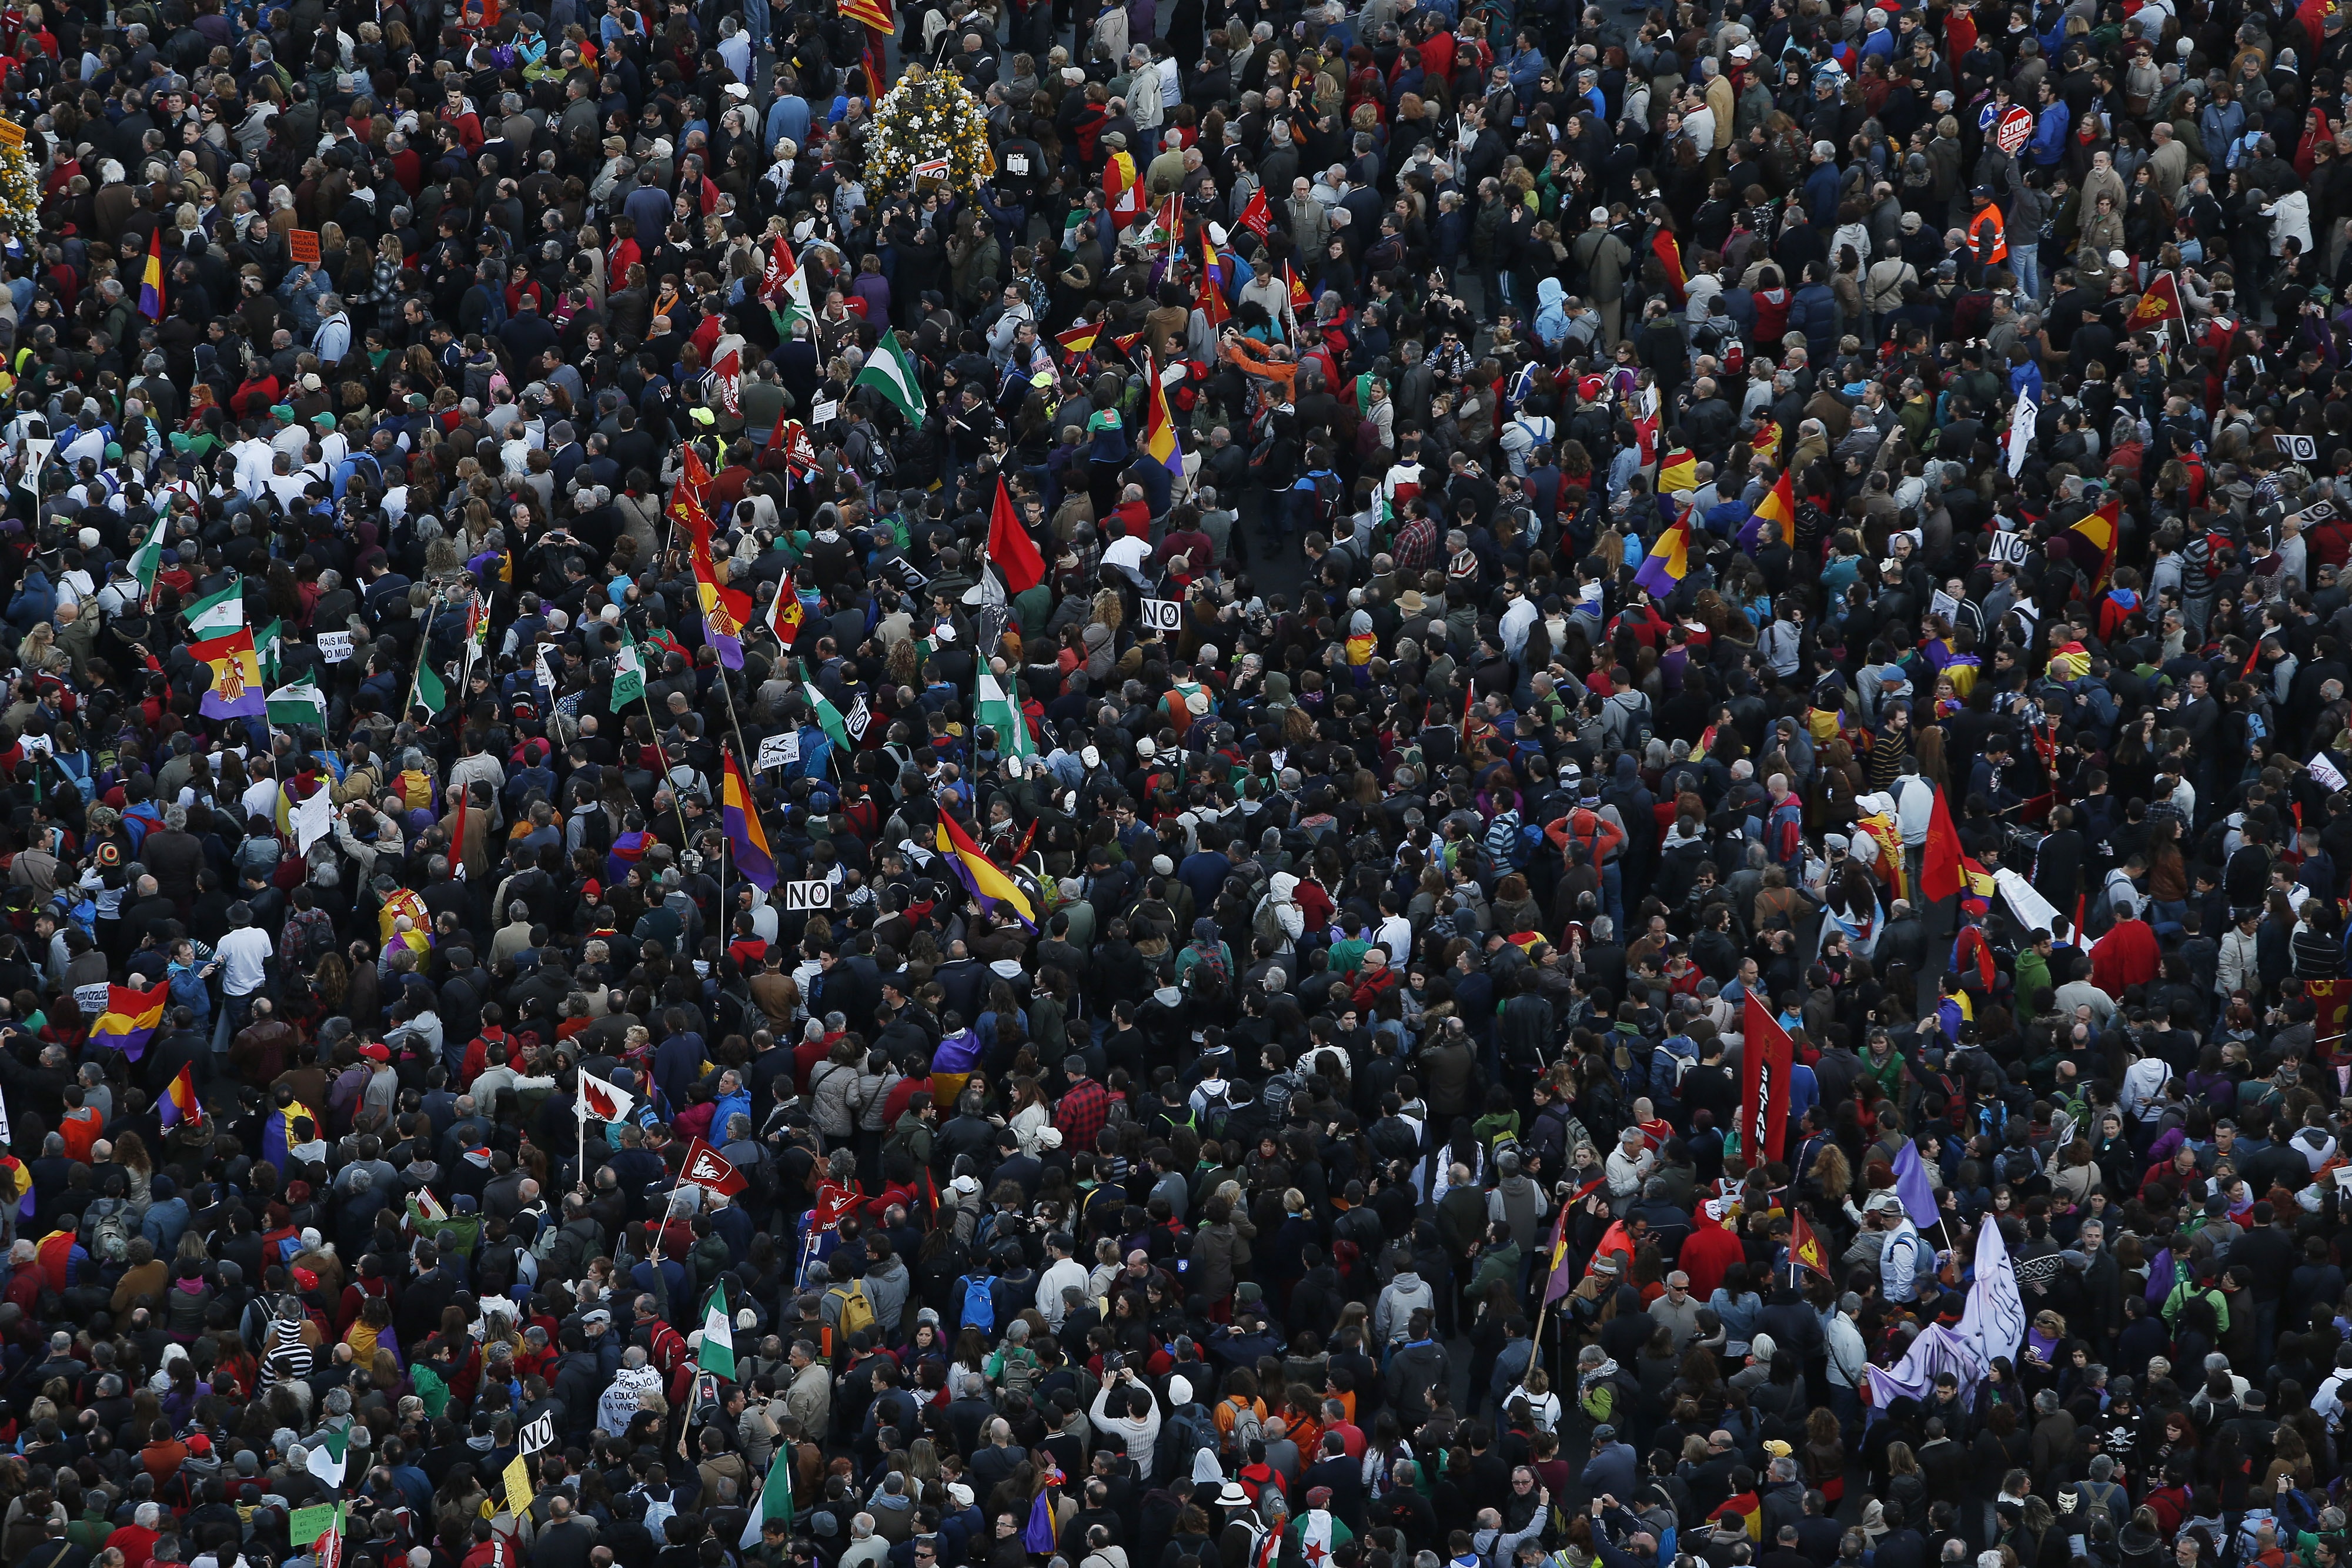 People gather during a protest against the Government in Madrid, Spain, Saturday, March 22, 2014., AP Photo/Andres Kudacki